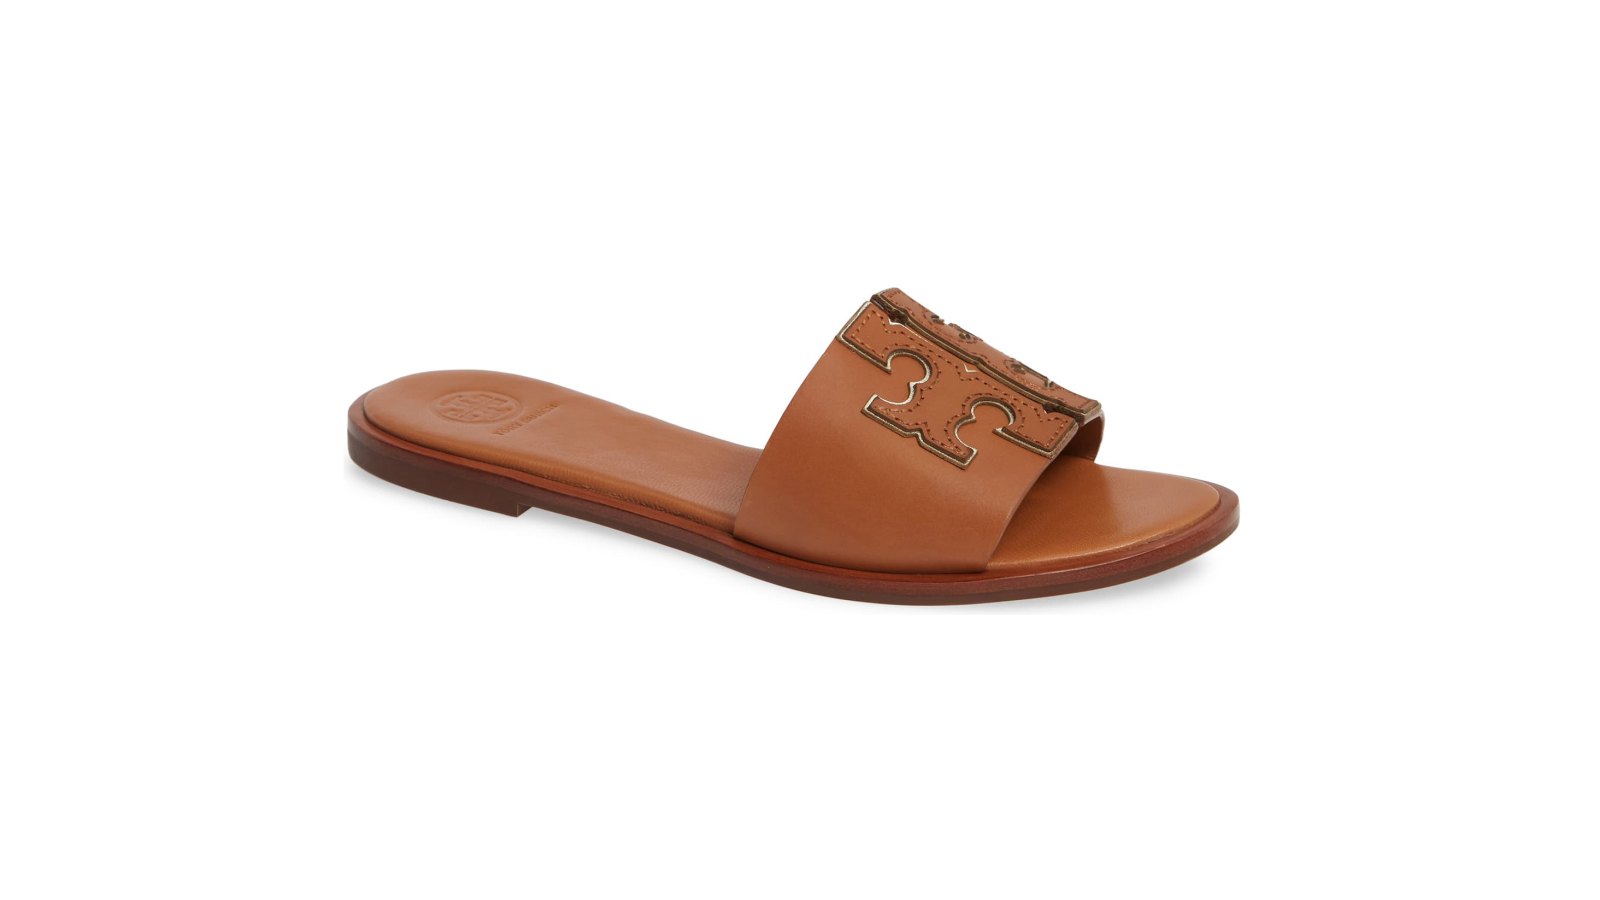 Tory Burch Sandals That Are an Upgraded Version of Your Favorite Slides